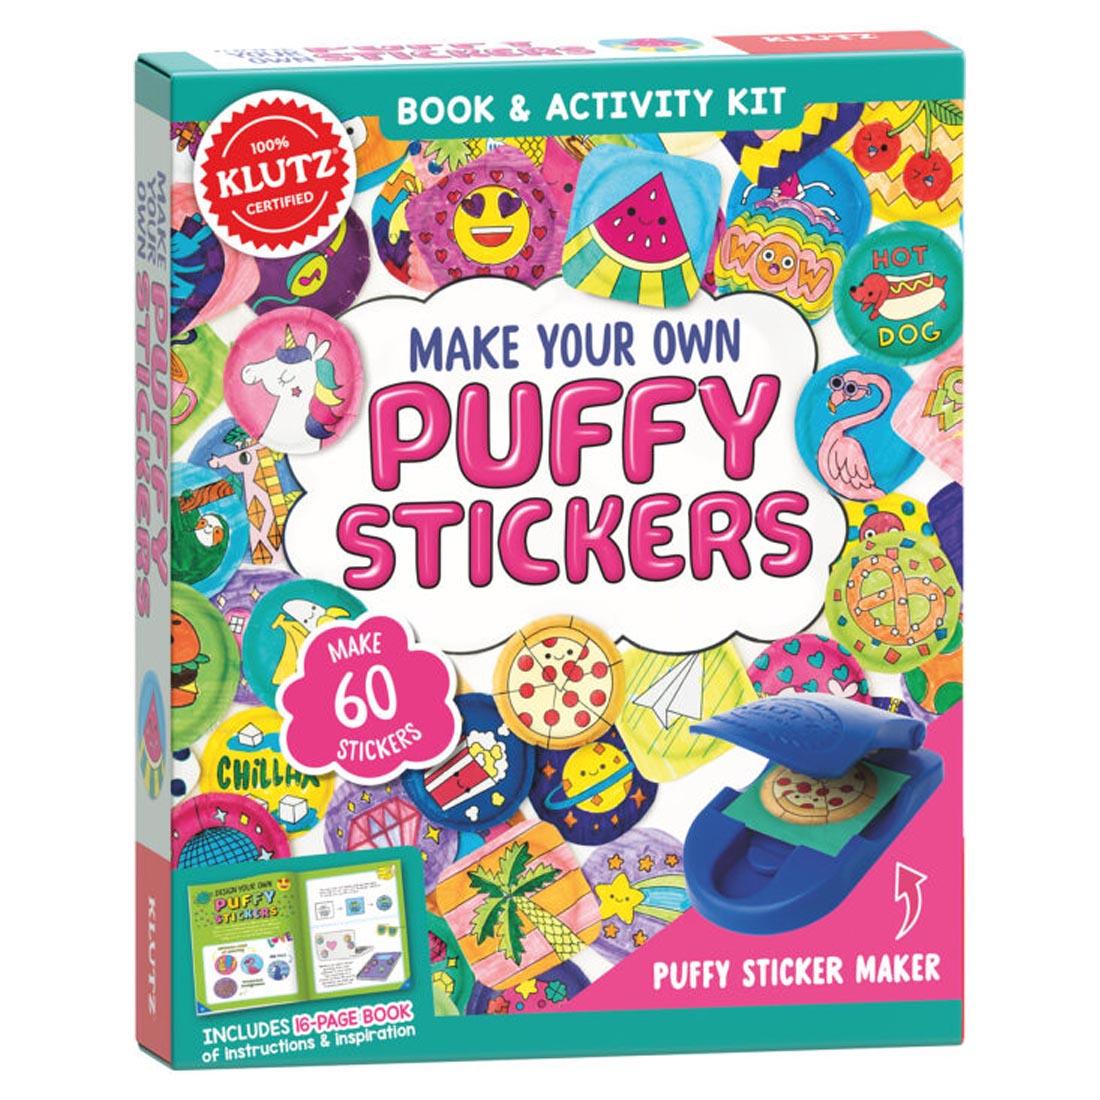 Make Your Own Puffy Stickers Book & Activity Kit By Klutz Press